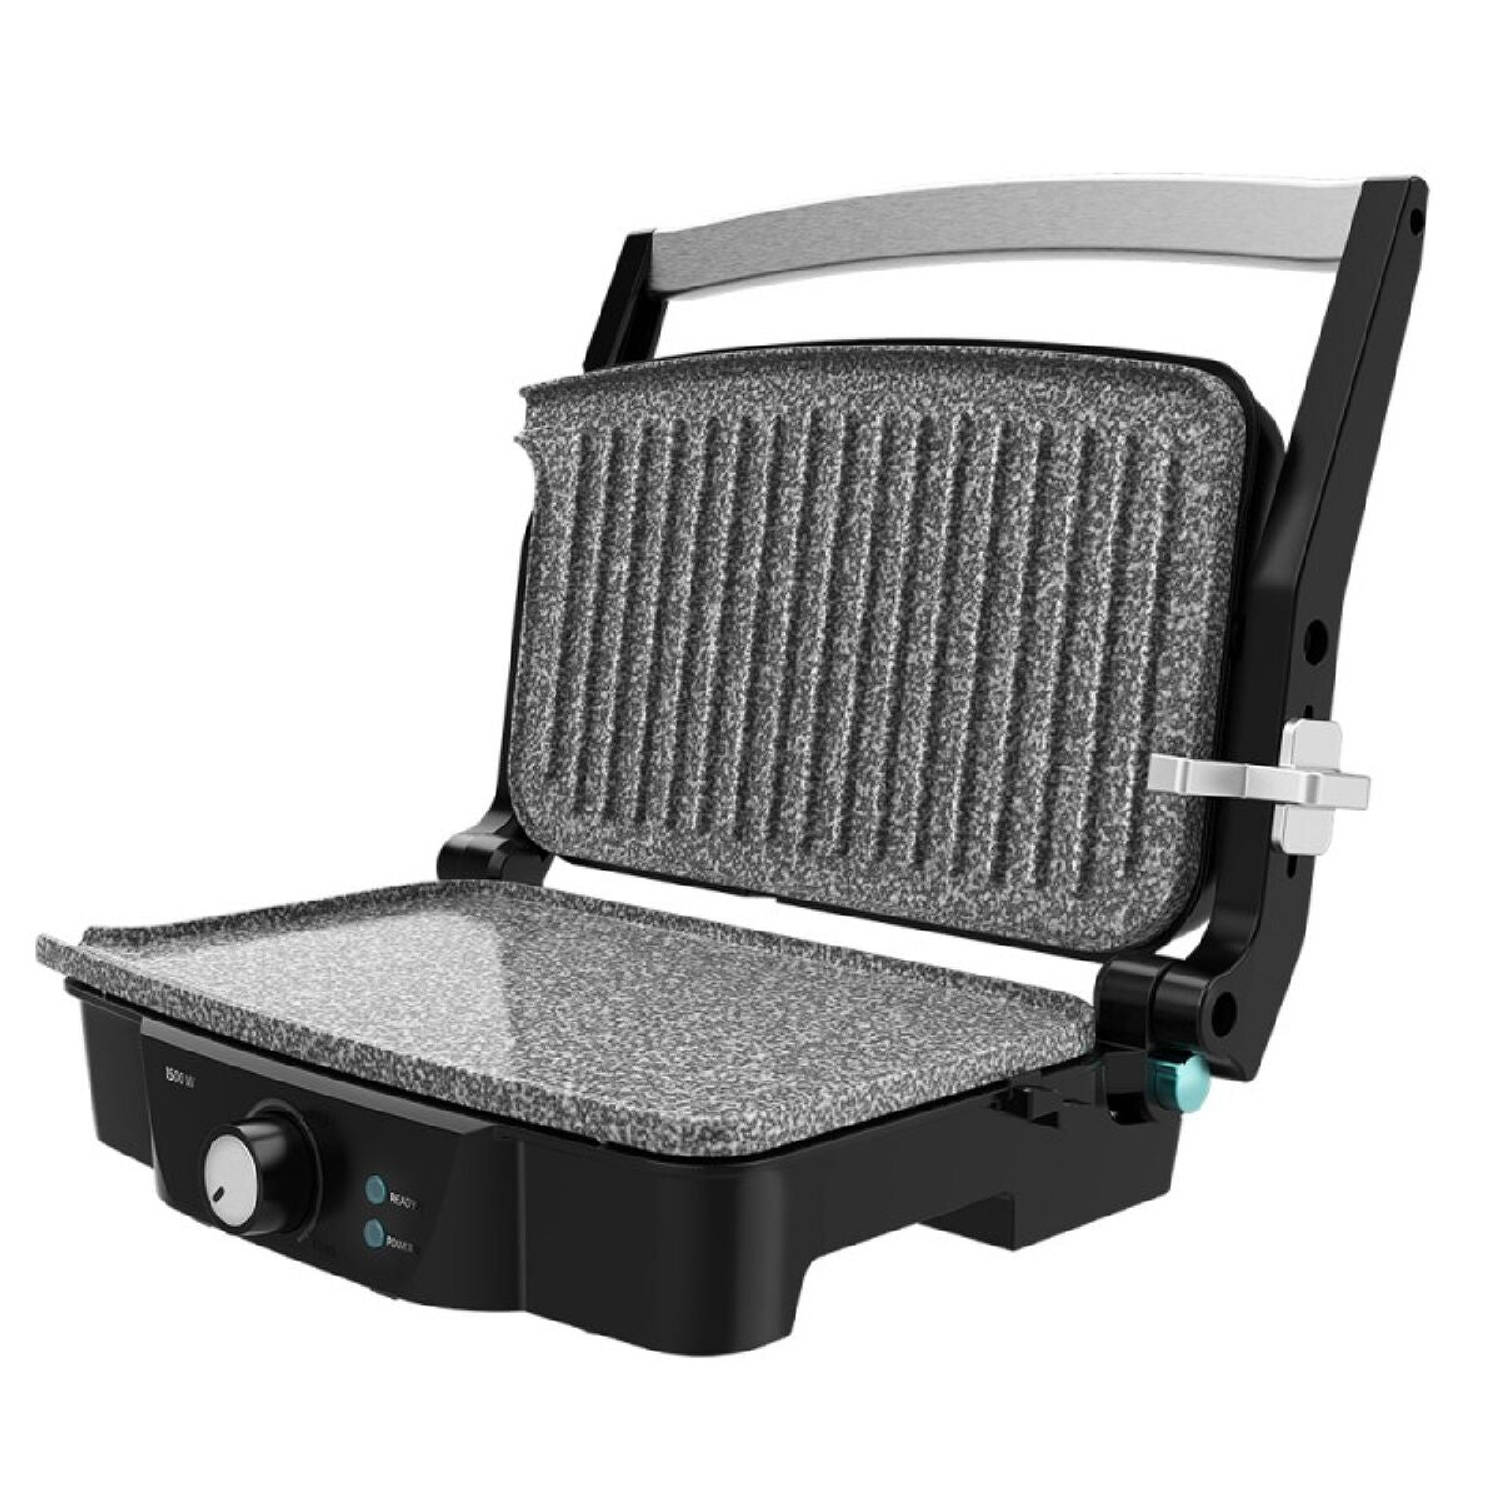 Grill Cecotec Rock&apos;nGrill 1500 1500 W